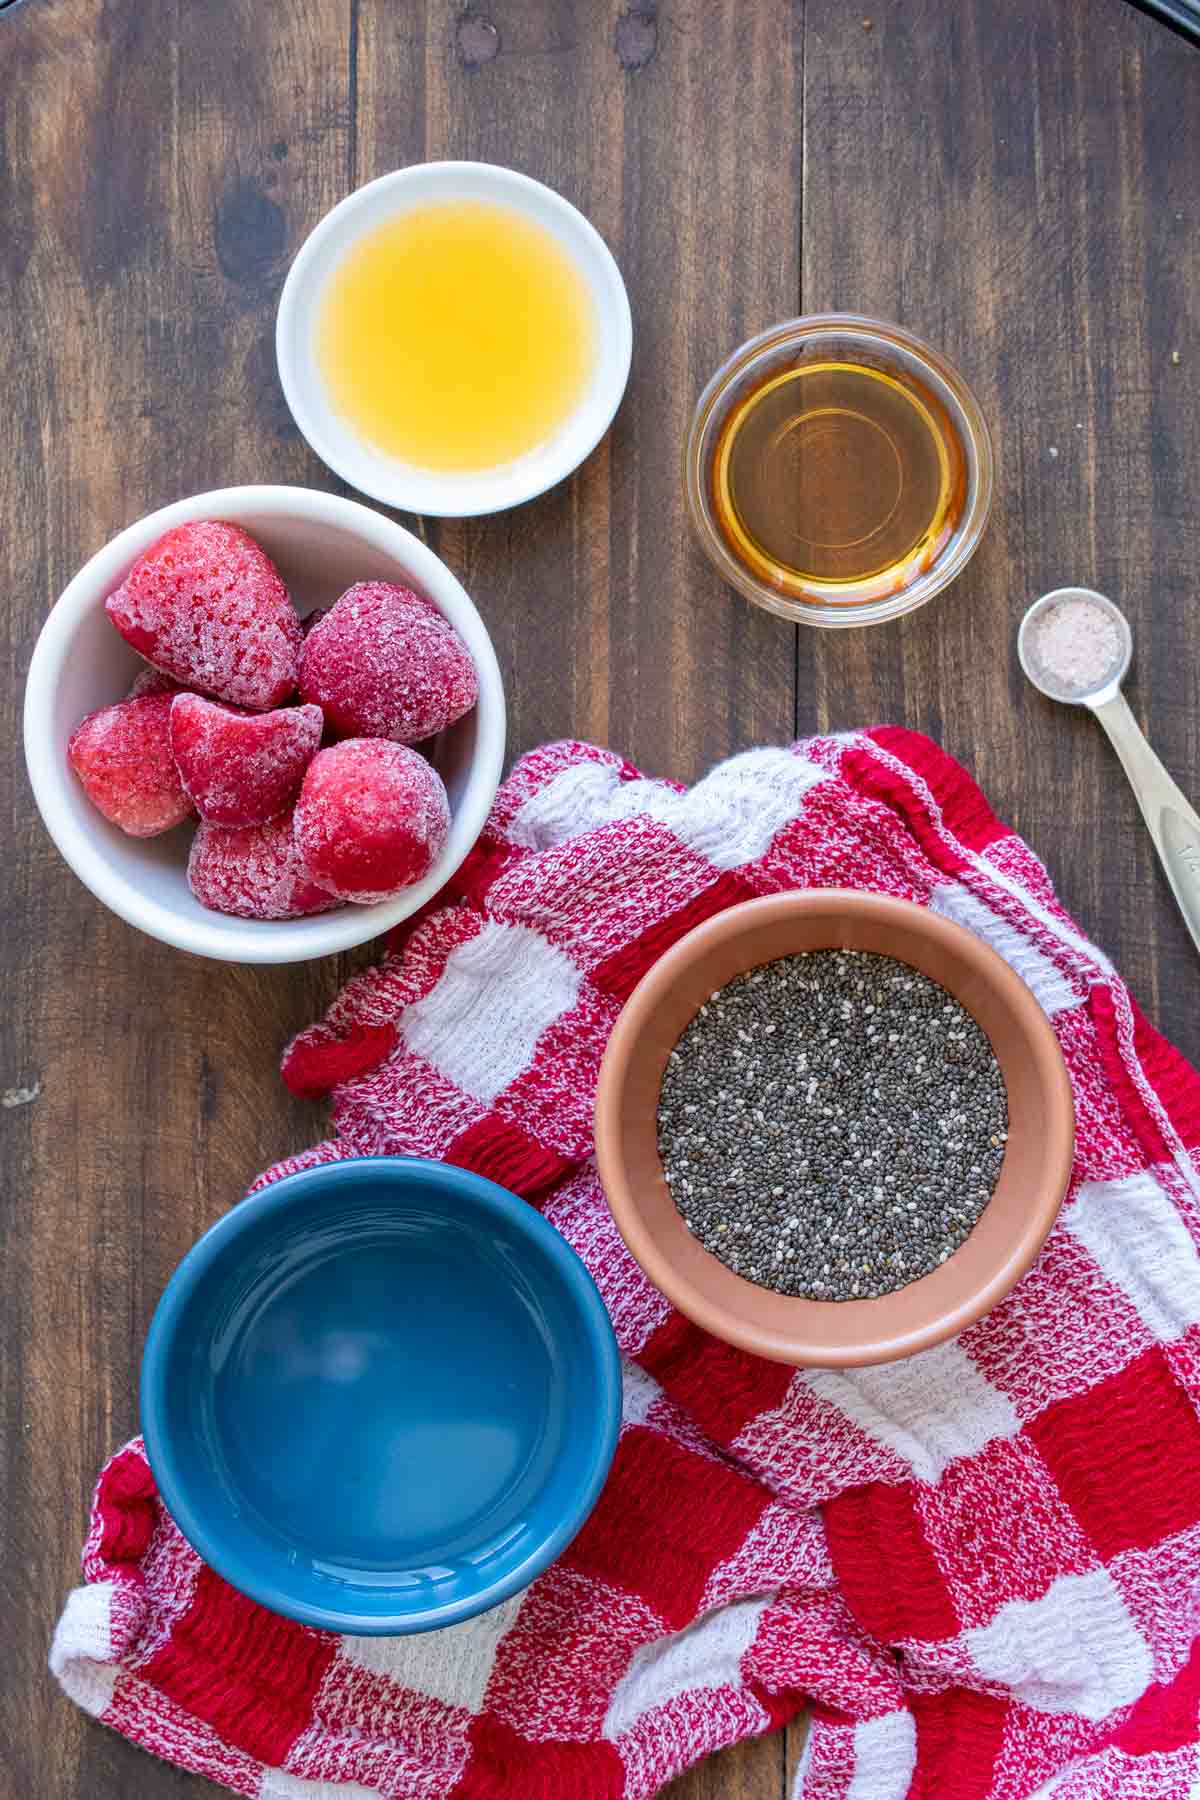 Colored bowls with ingredients to make chia seed jam on a red checkered towel